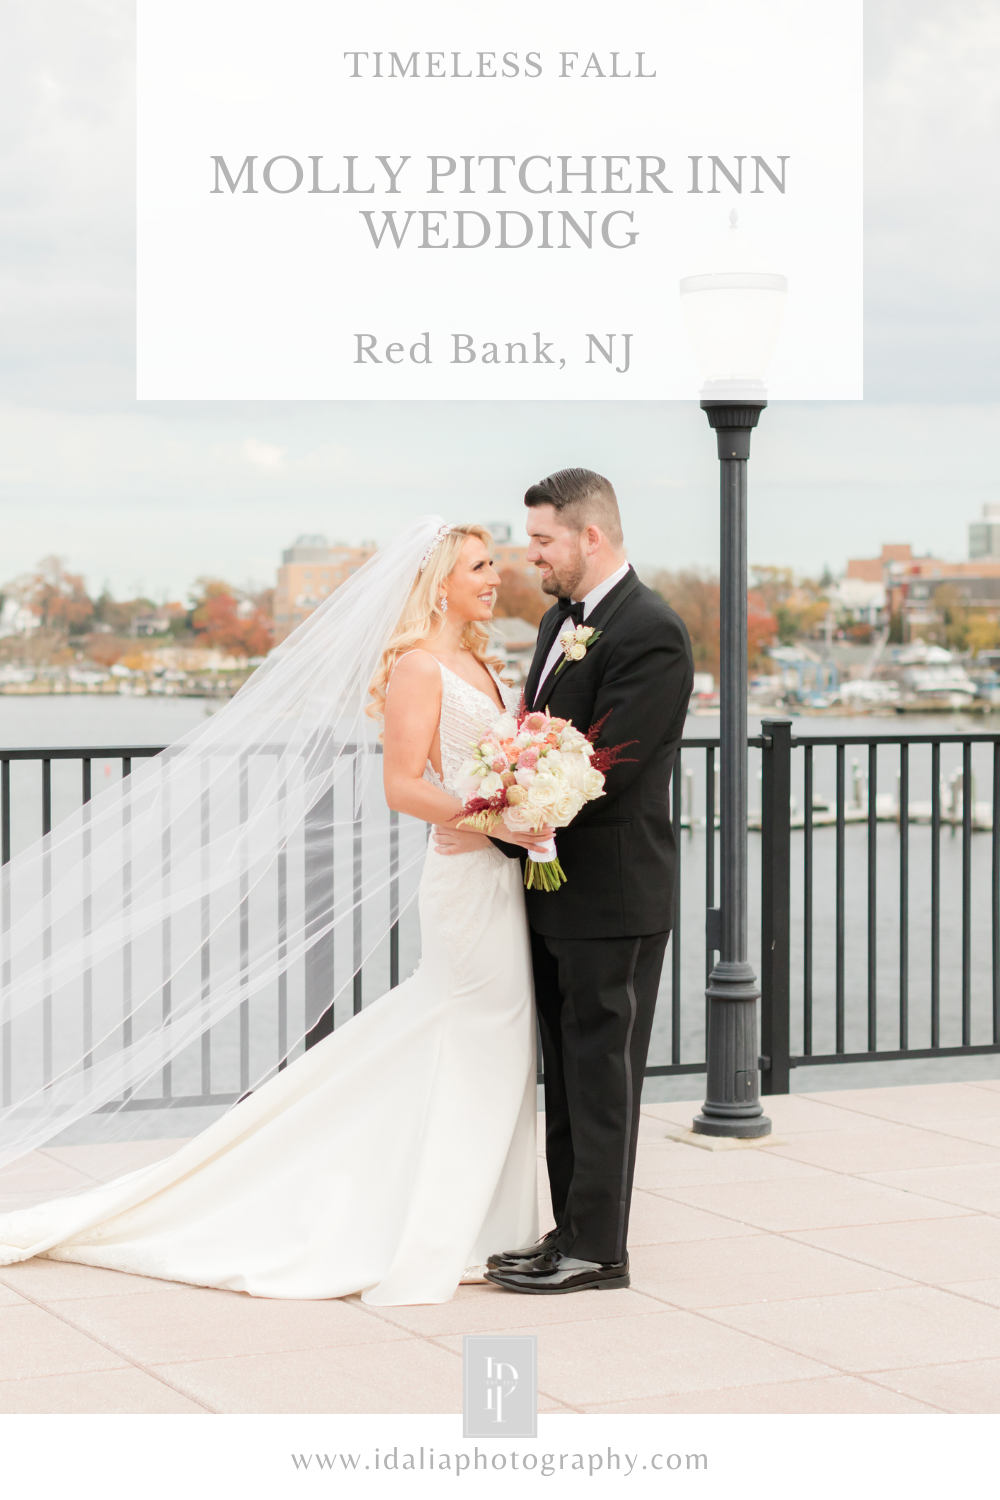 Timeless Wedding at the Molly Pitcher Inn in Red Bank, NJ photographed by New Jersey wedding photographer Idalia Photography